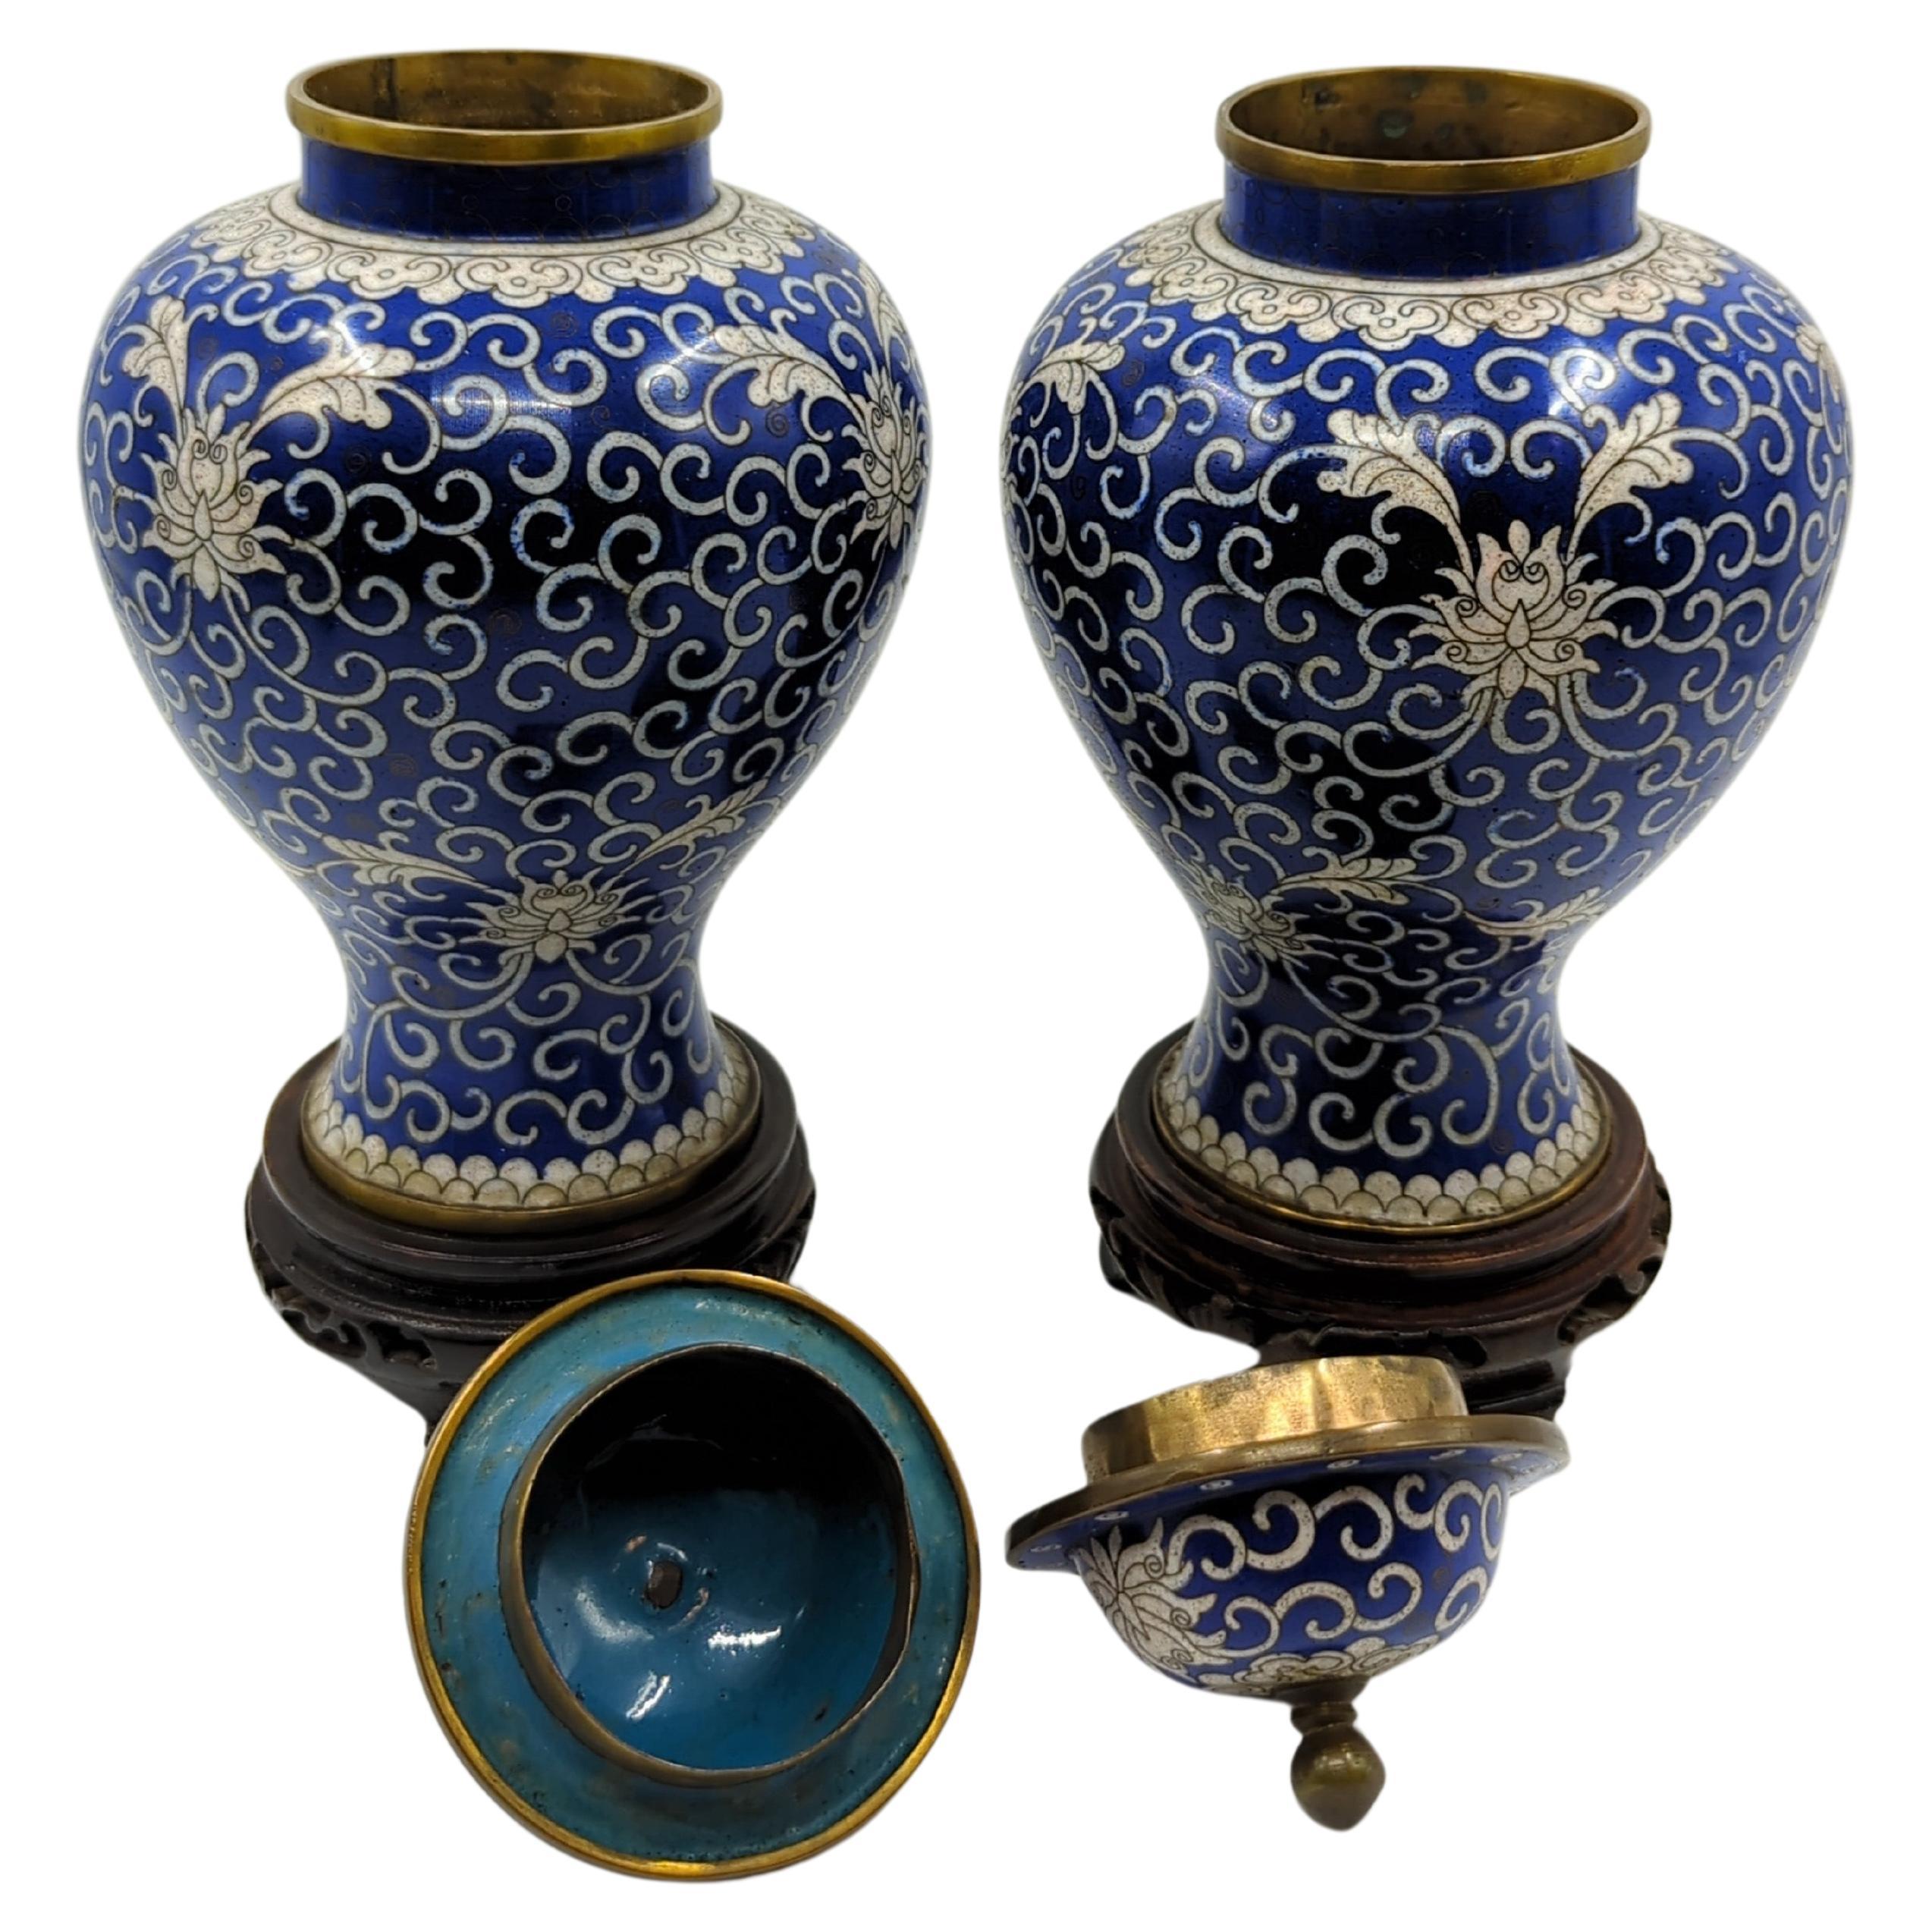 20th Century Antique Chinese Cloisonne Blue White General Jar Baluster Vase Garniture w Stand For Sale